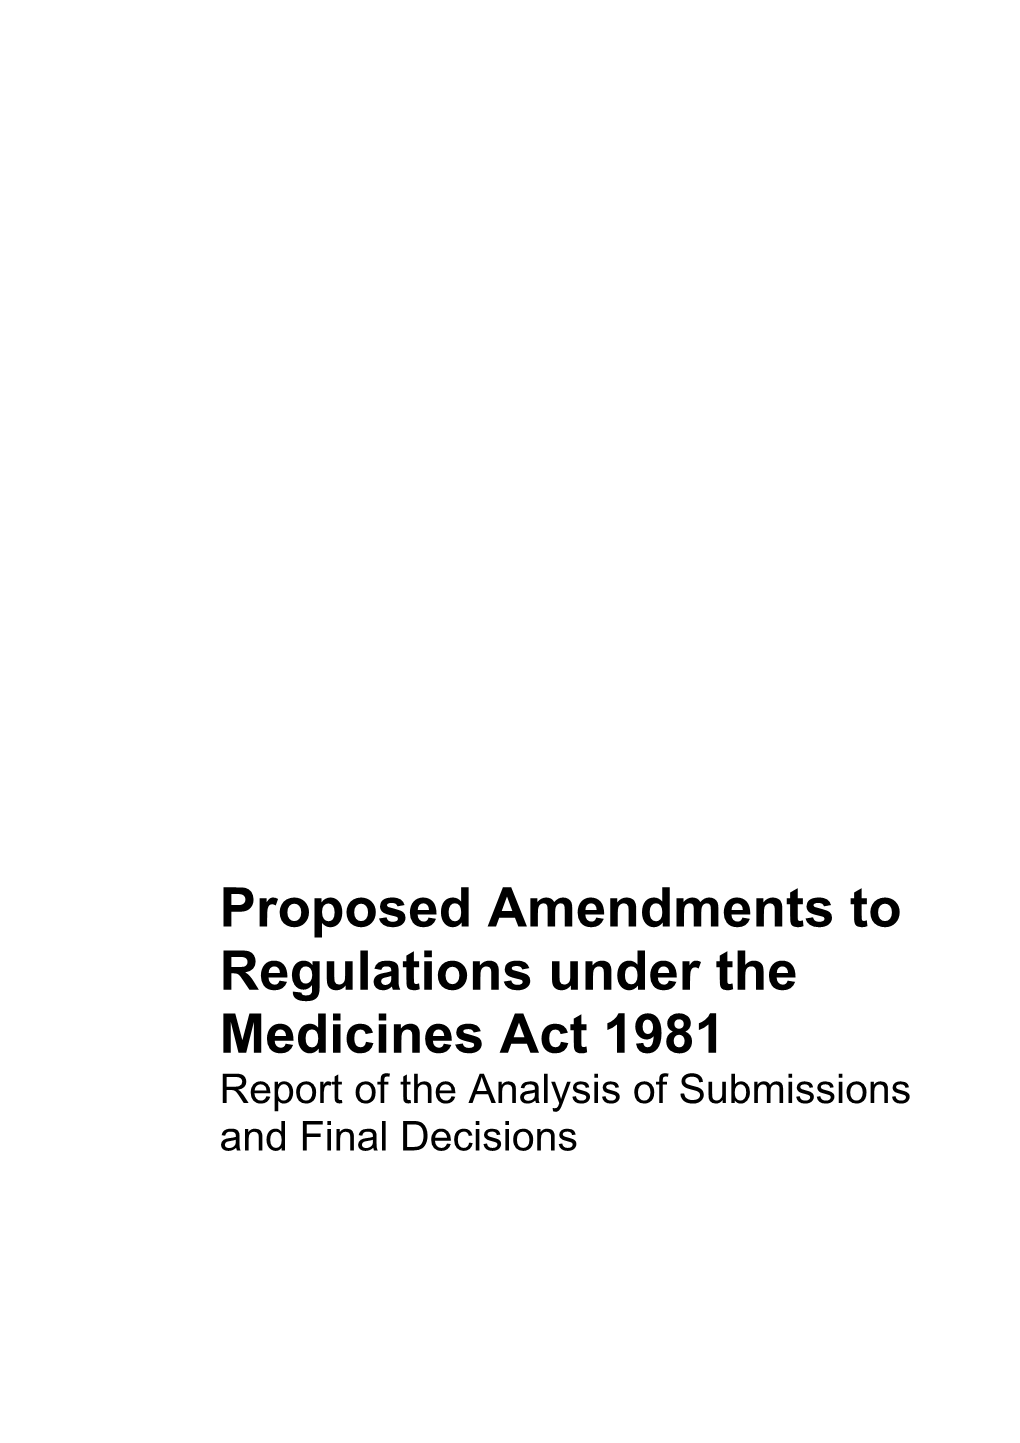 Proposed Amendments to Regulations Under the Medicines Act 1981